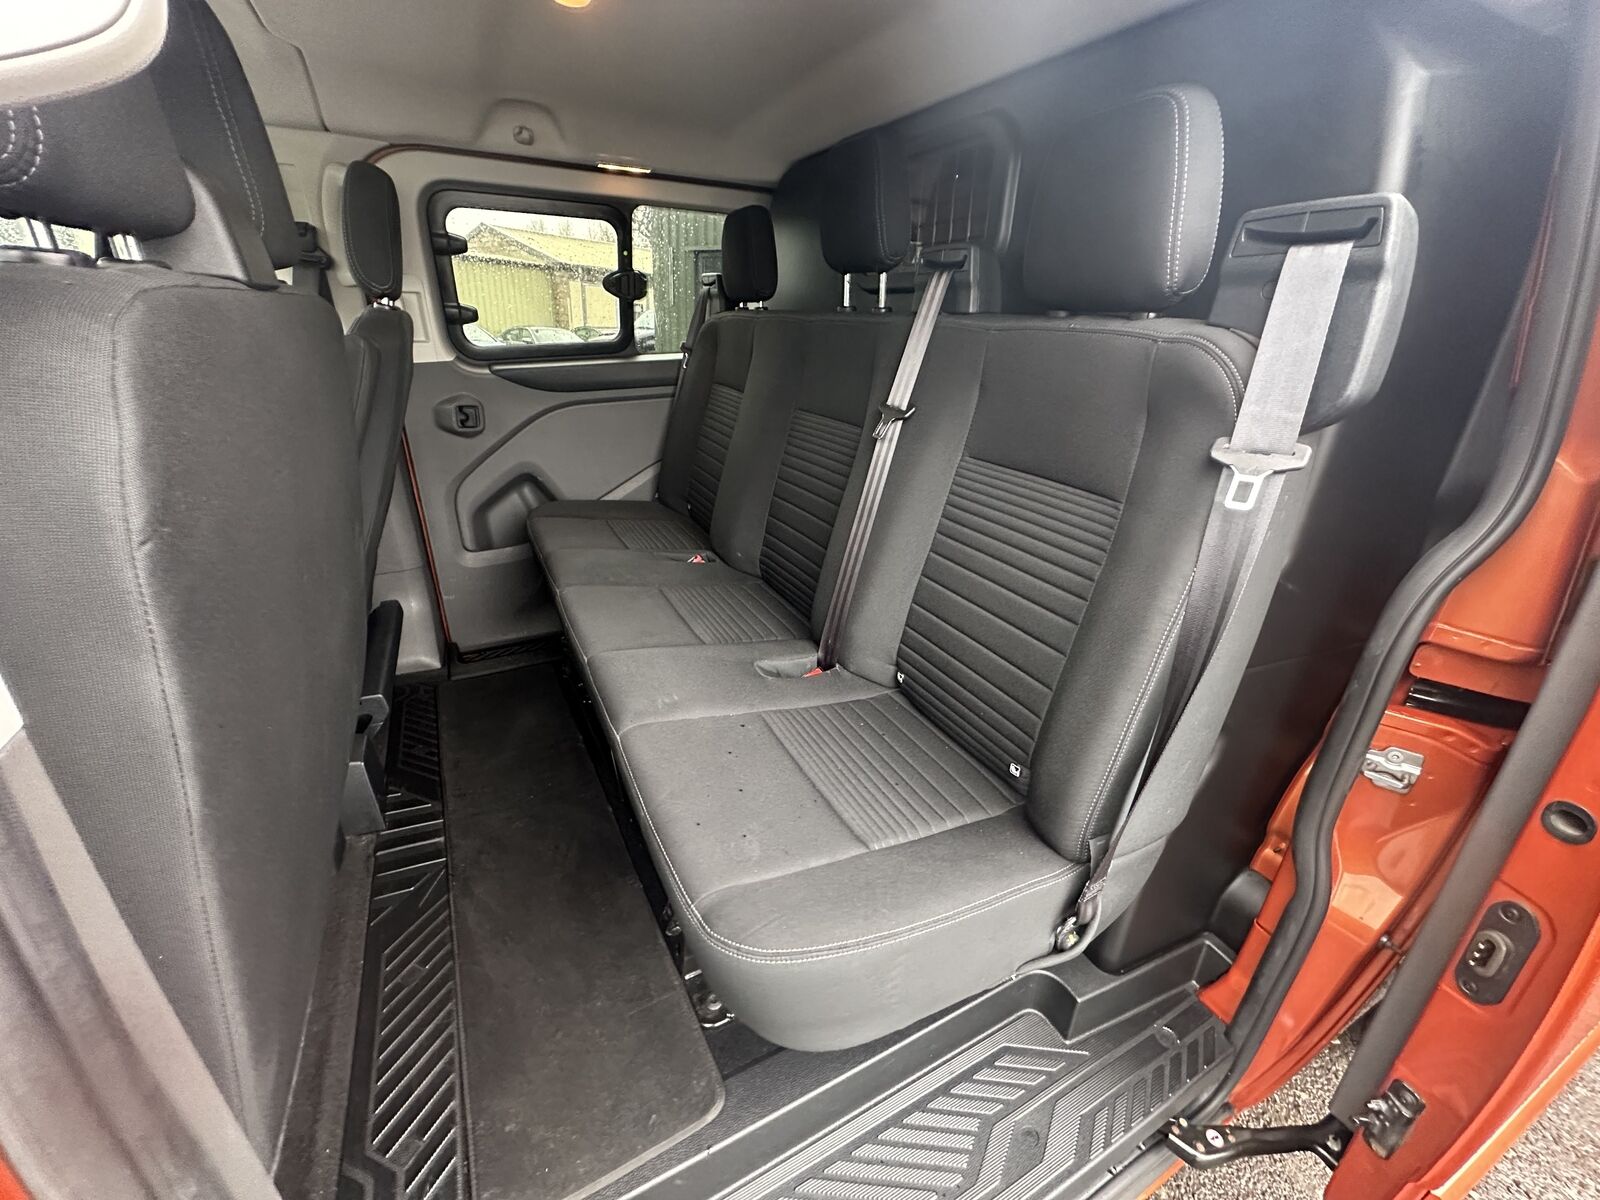 Bid on **(ONLY 89K MILEAGE)** UNIQUE 68 PLATE TRANSIT CUSTOM CREW CAB - FACTORY FIT (NO VAT ON HAMMER)- Buy &amp; Sell on Auction with EAMA Group